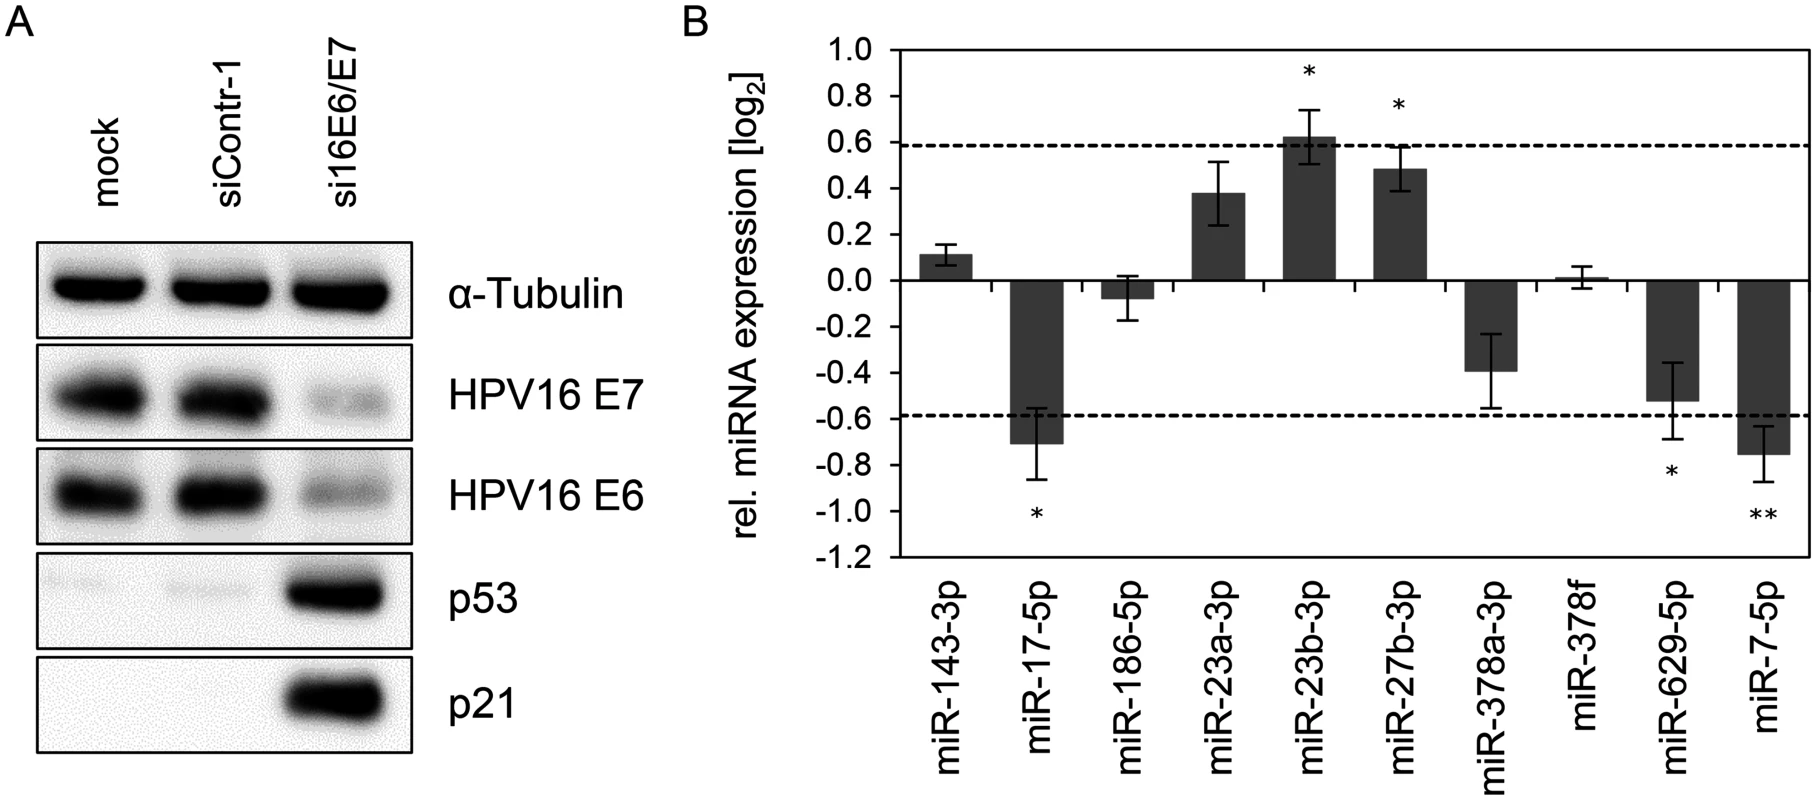 Inhibition of endogenous HPV16 <i>E6/E7</i> expression: Effects on selected intracellular miRNAs.